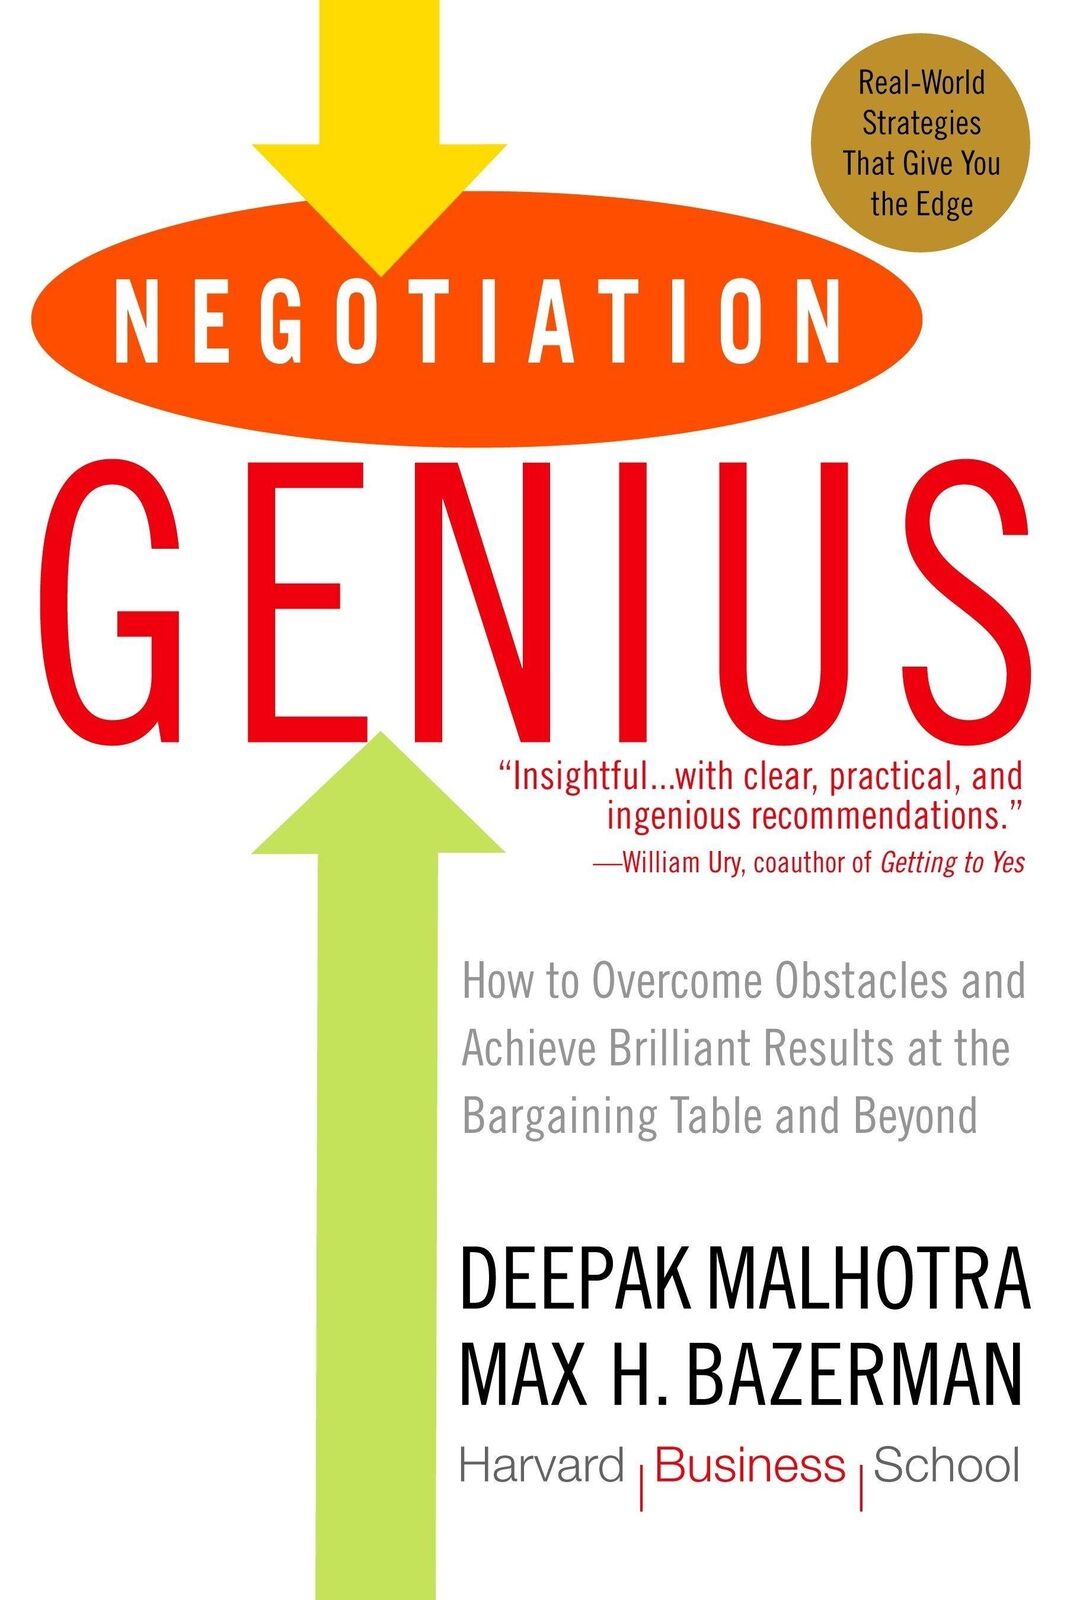 Master Negotiation: Overcome Obstacles, Achieve Brilliance